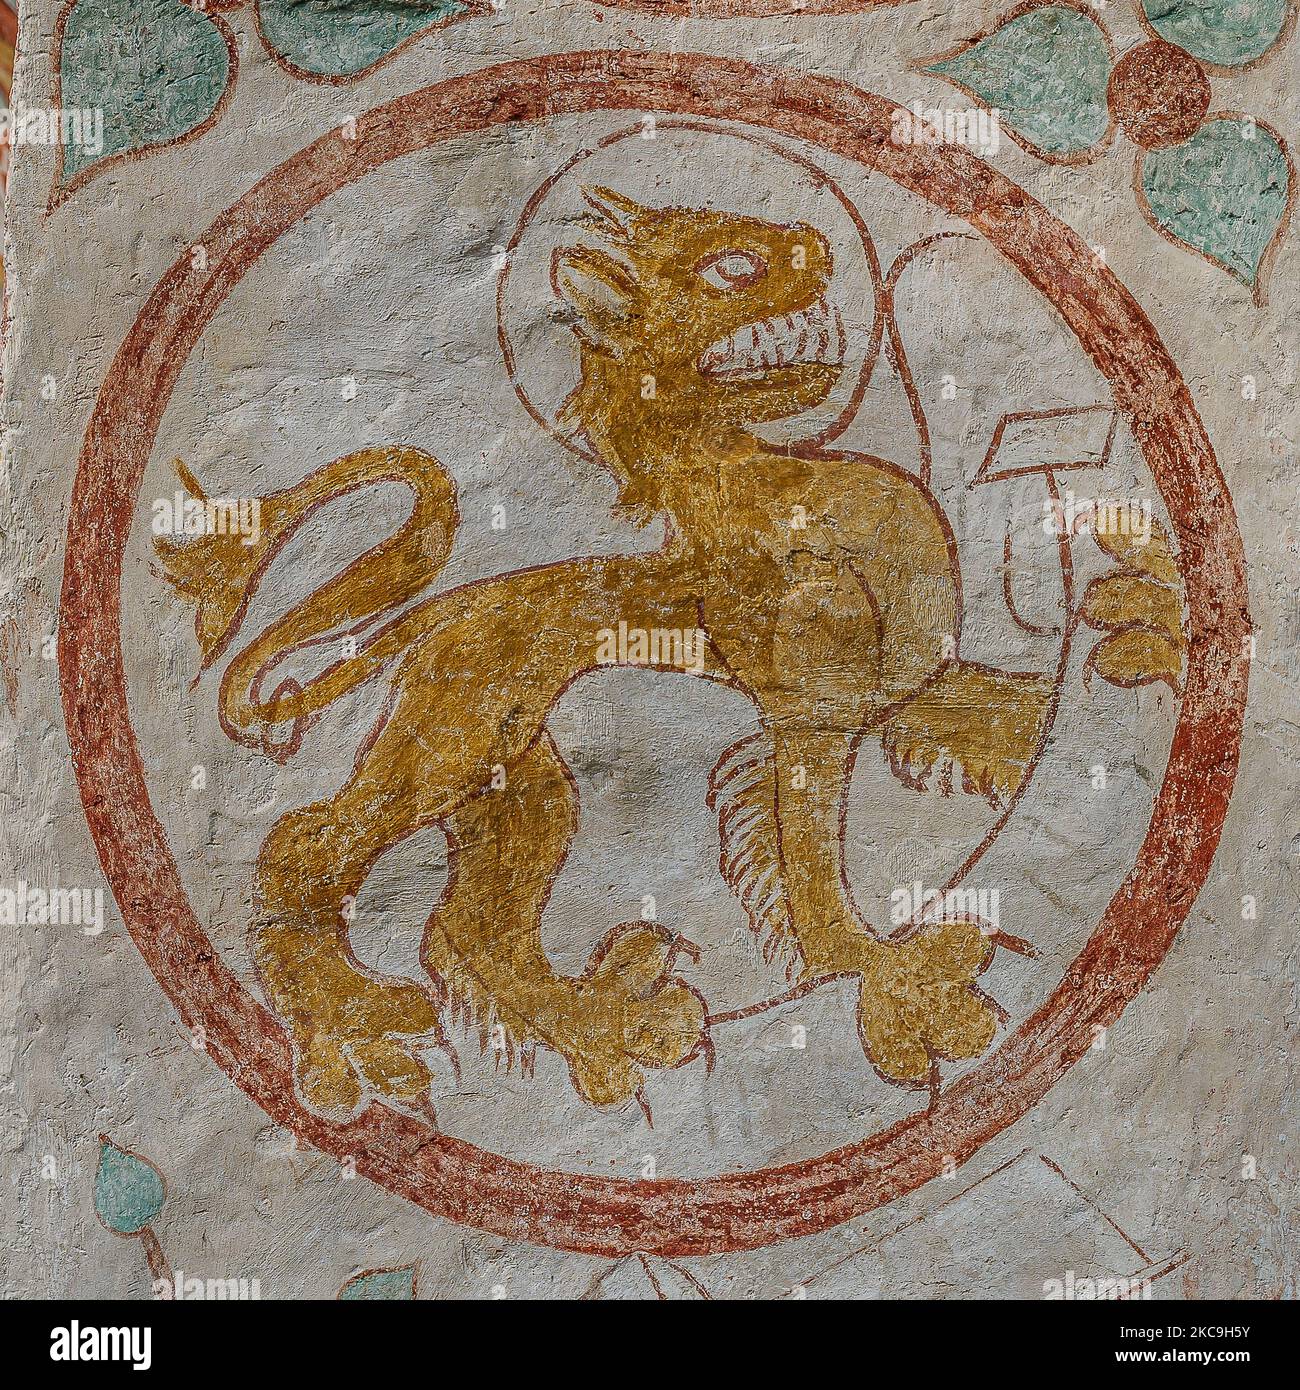 the winged lion is a symbol for Saint Mark, an ancient fresco in Fanefjord church, Denmark, October 10, 2022 Stock Photo